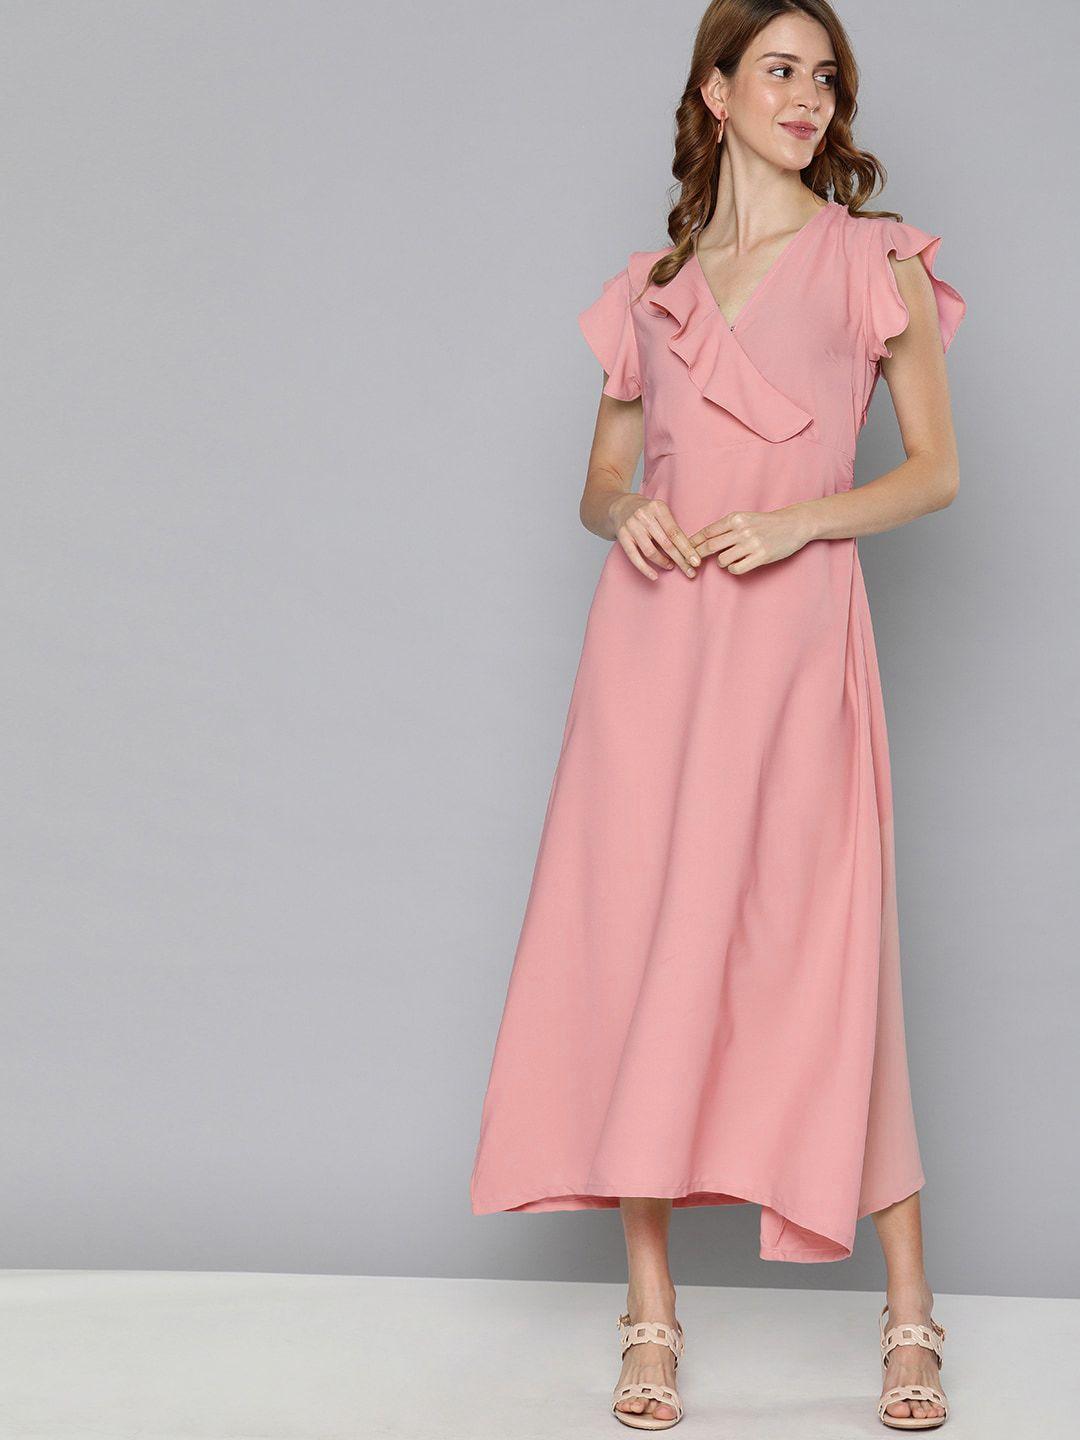 here&now women pink solid a-line dress with ruffles